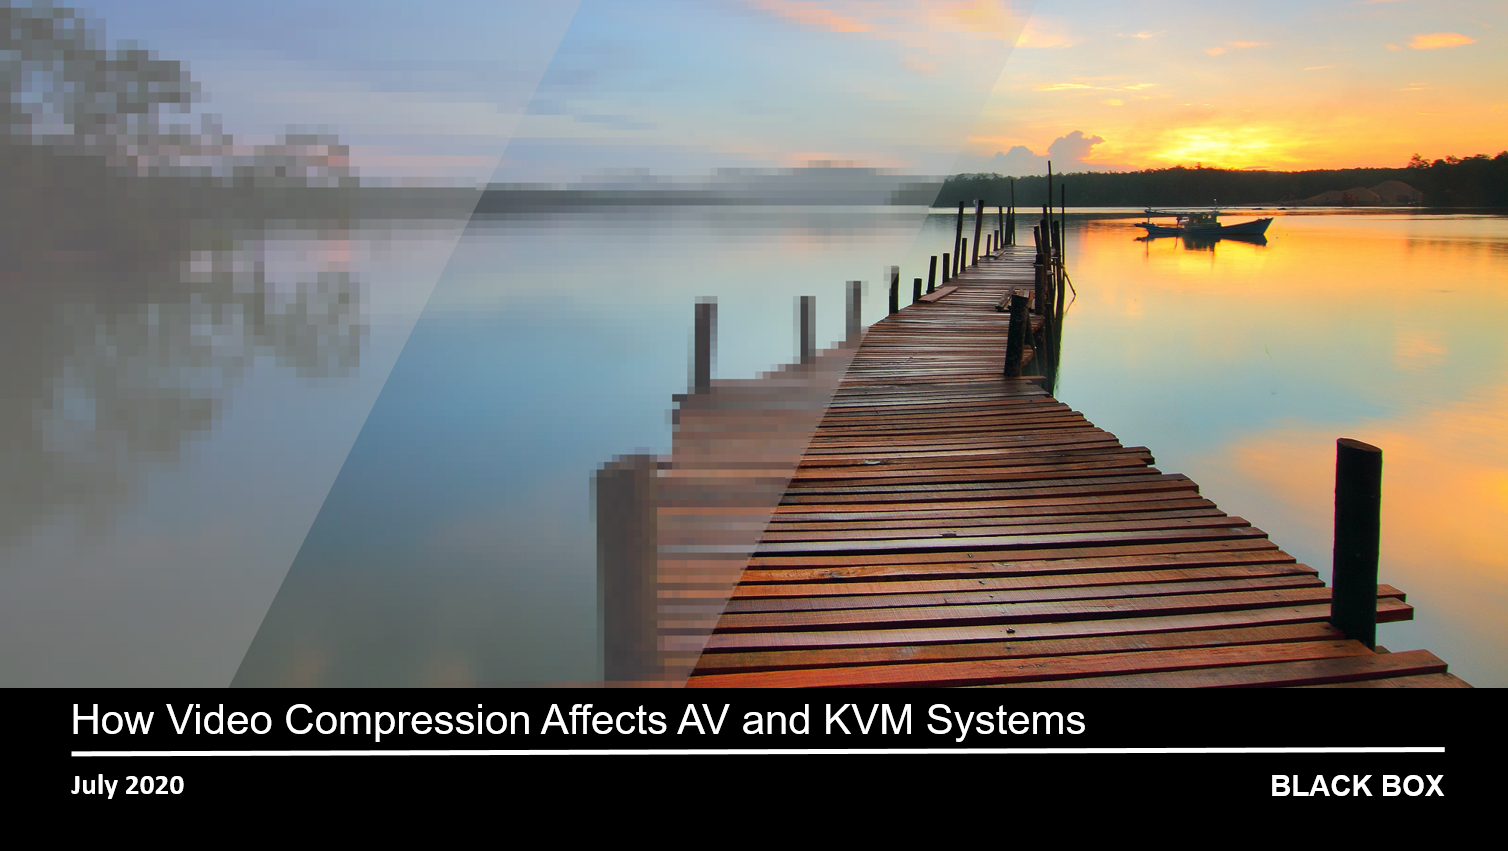 Black to host webinar focused on video compression in KVM systems